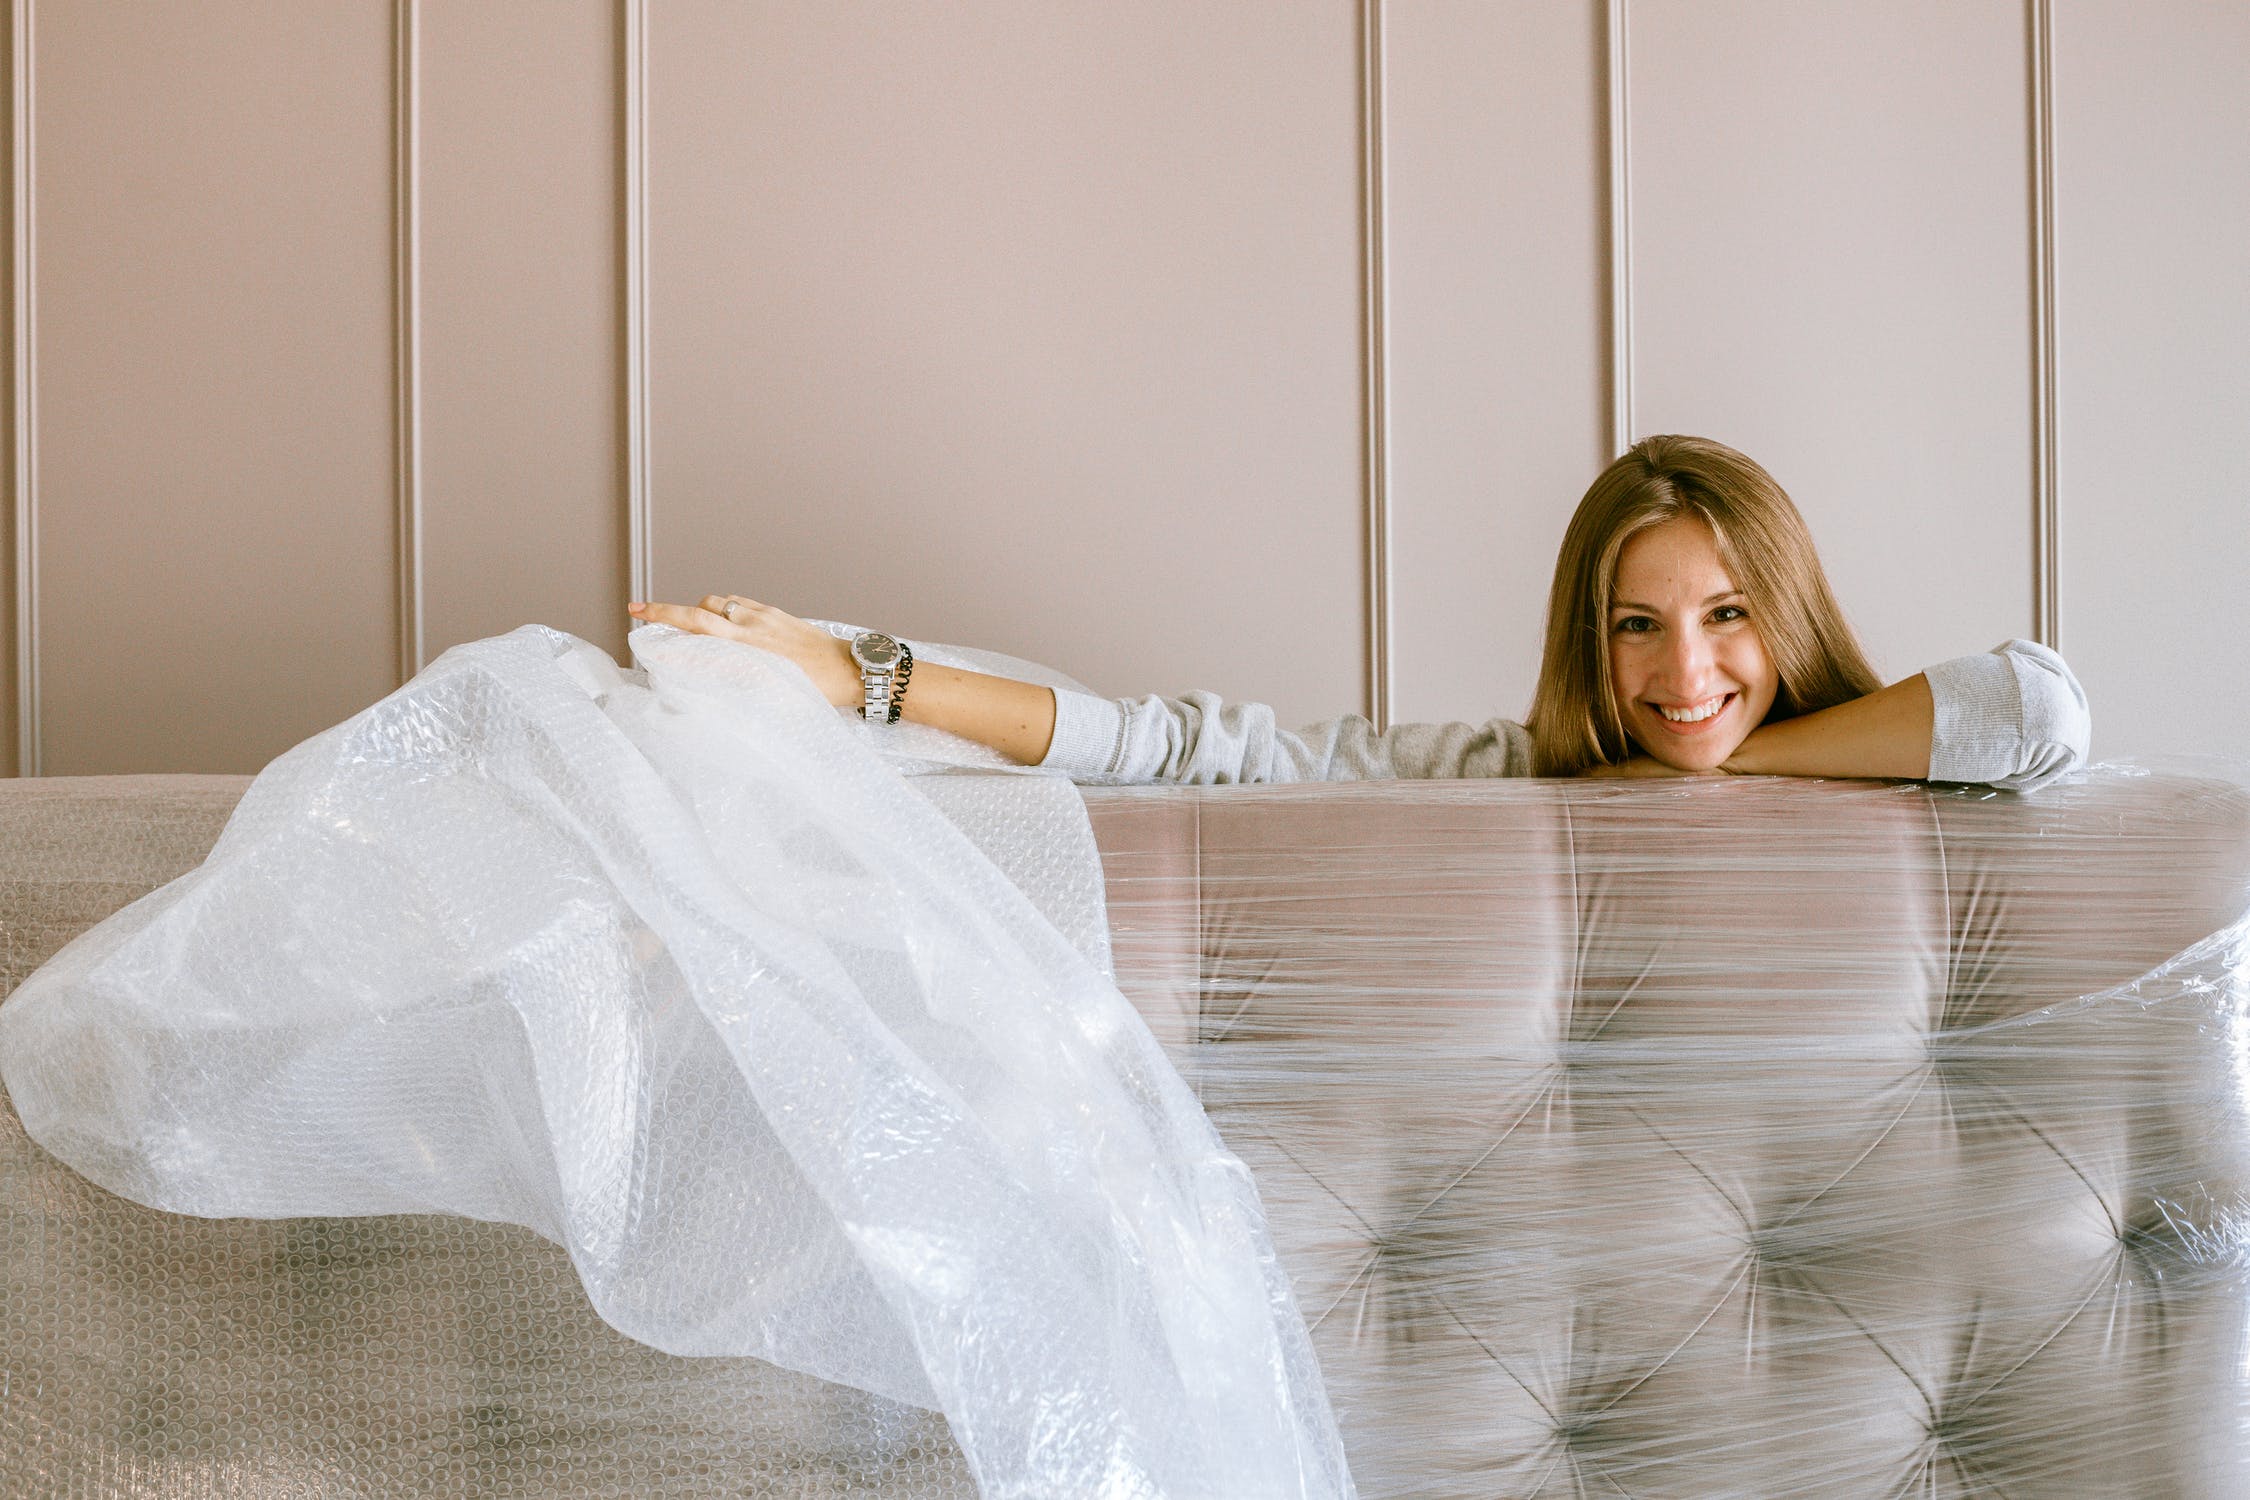 A woman with bubble unwrapping her bed